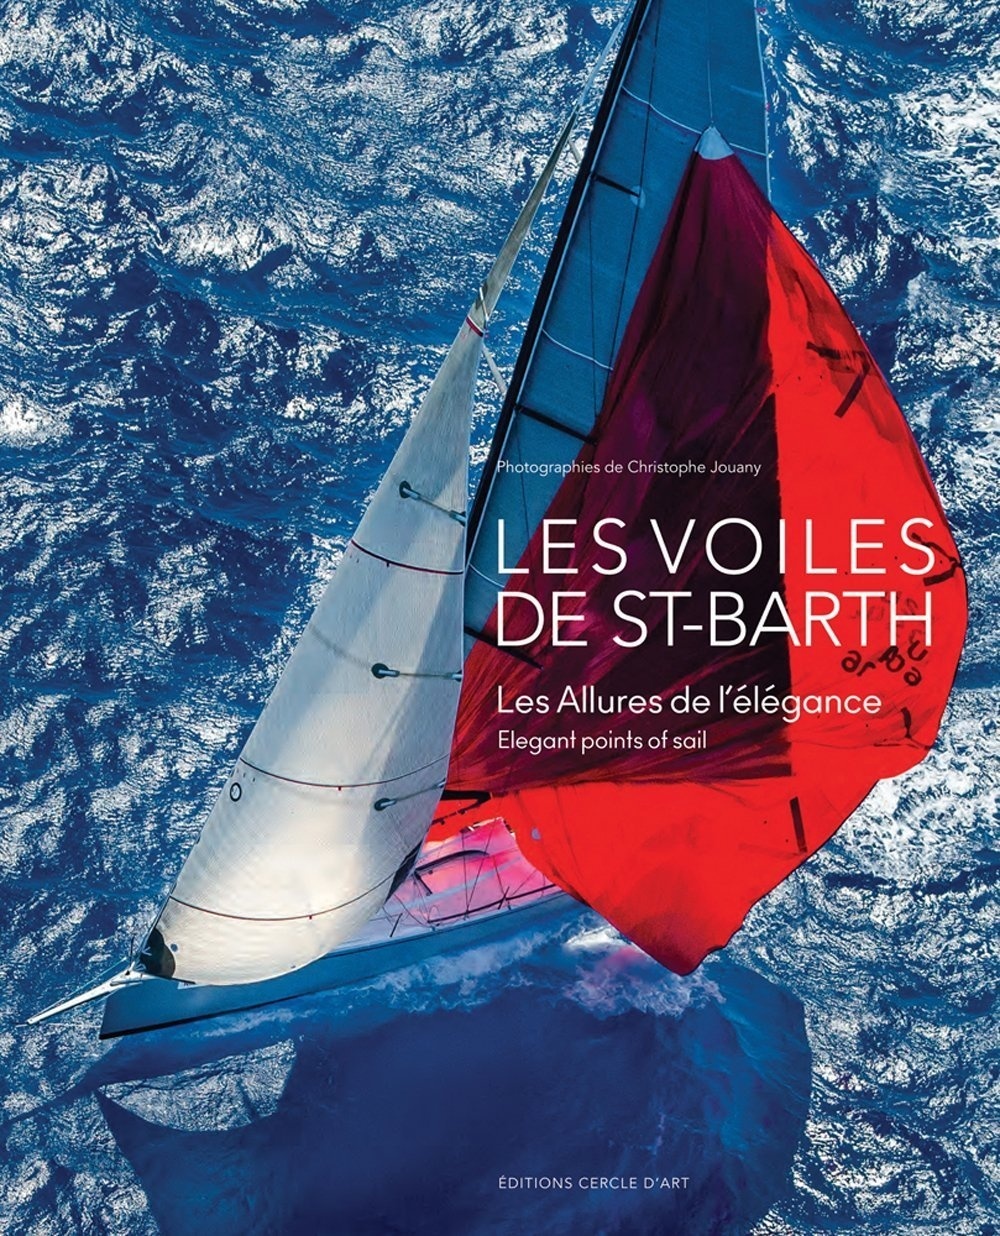 Les Voiles de Saint-Barth: Elegant Points of Sail (English and French Edition)